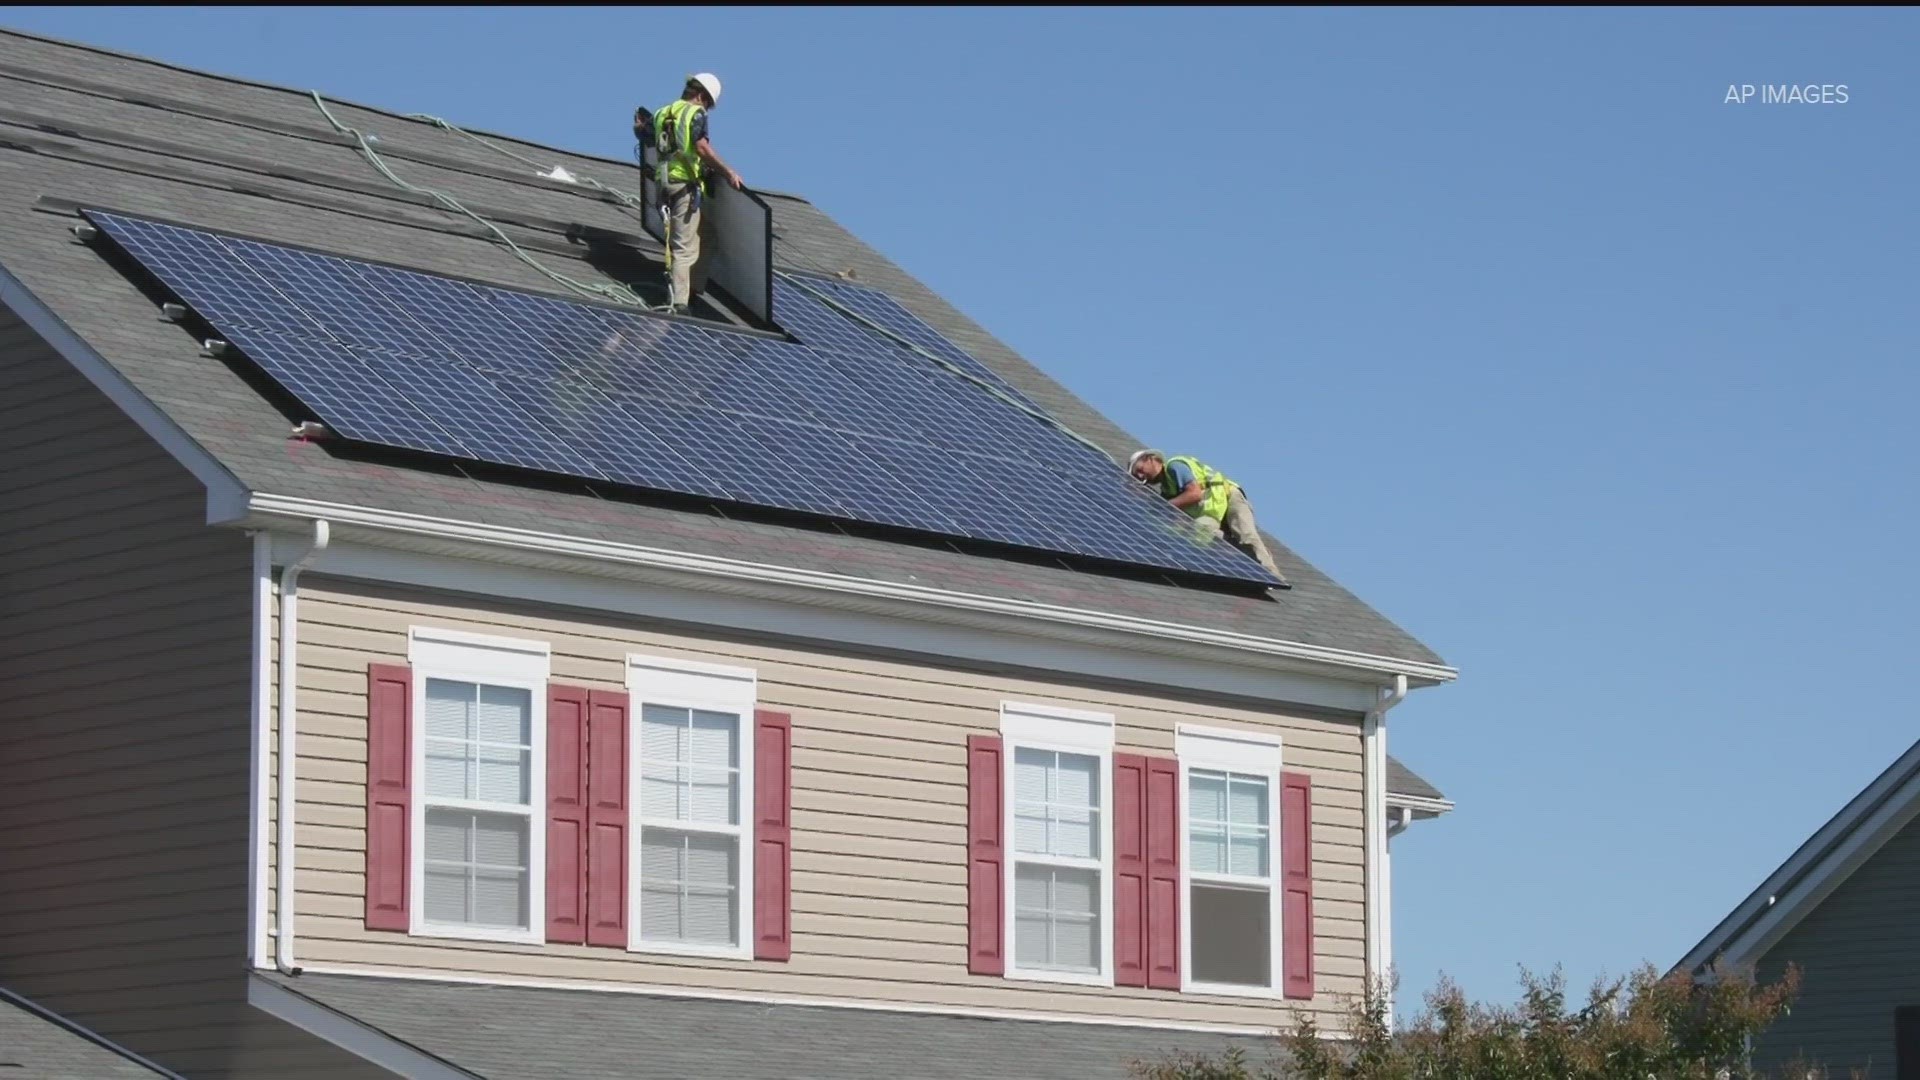 The Georgia Bright program launched on Tuesday giving lower and middle income families a chance at affordable solar power energy.